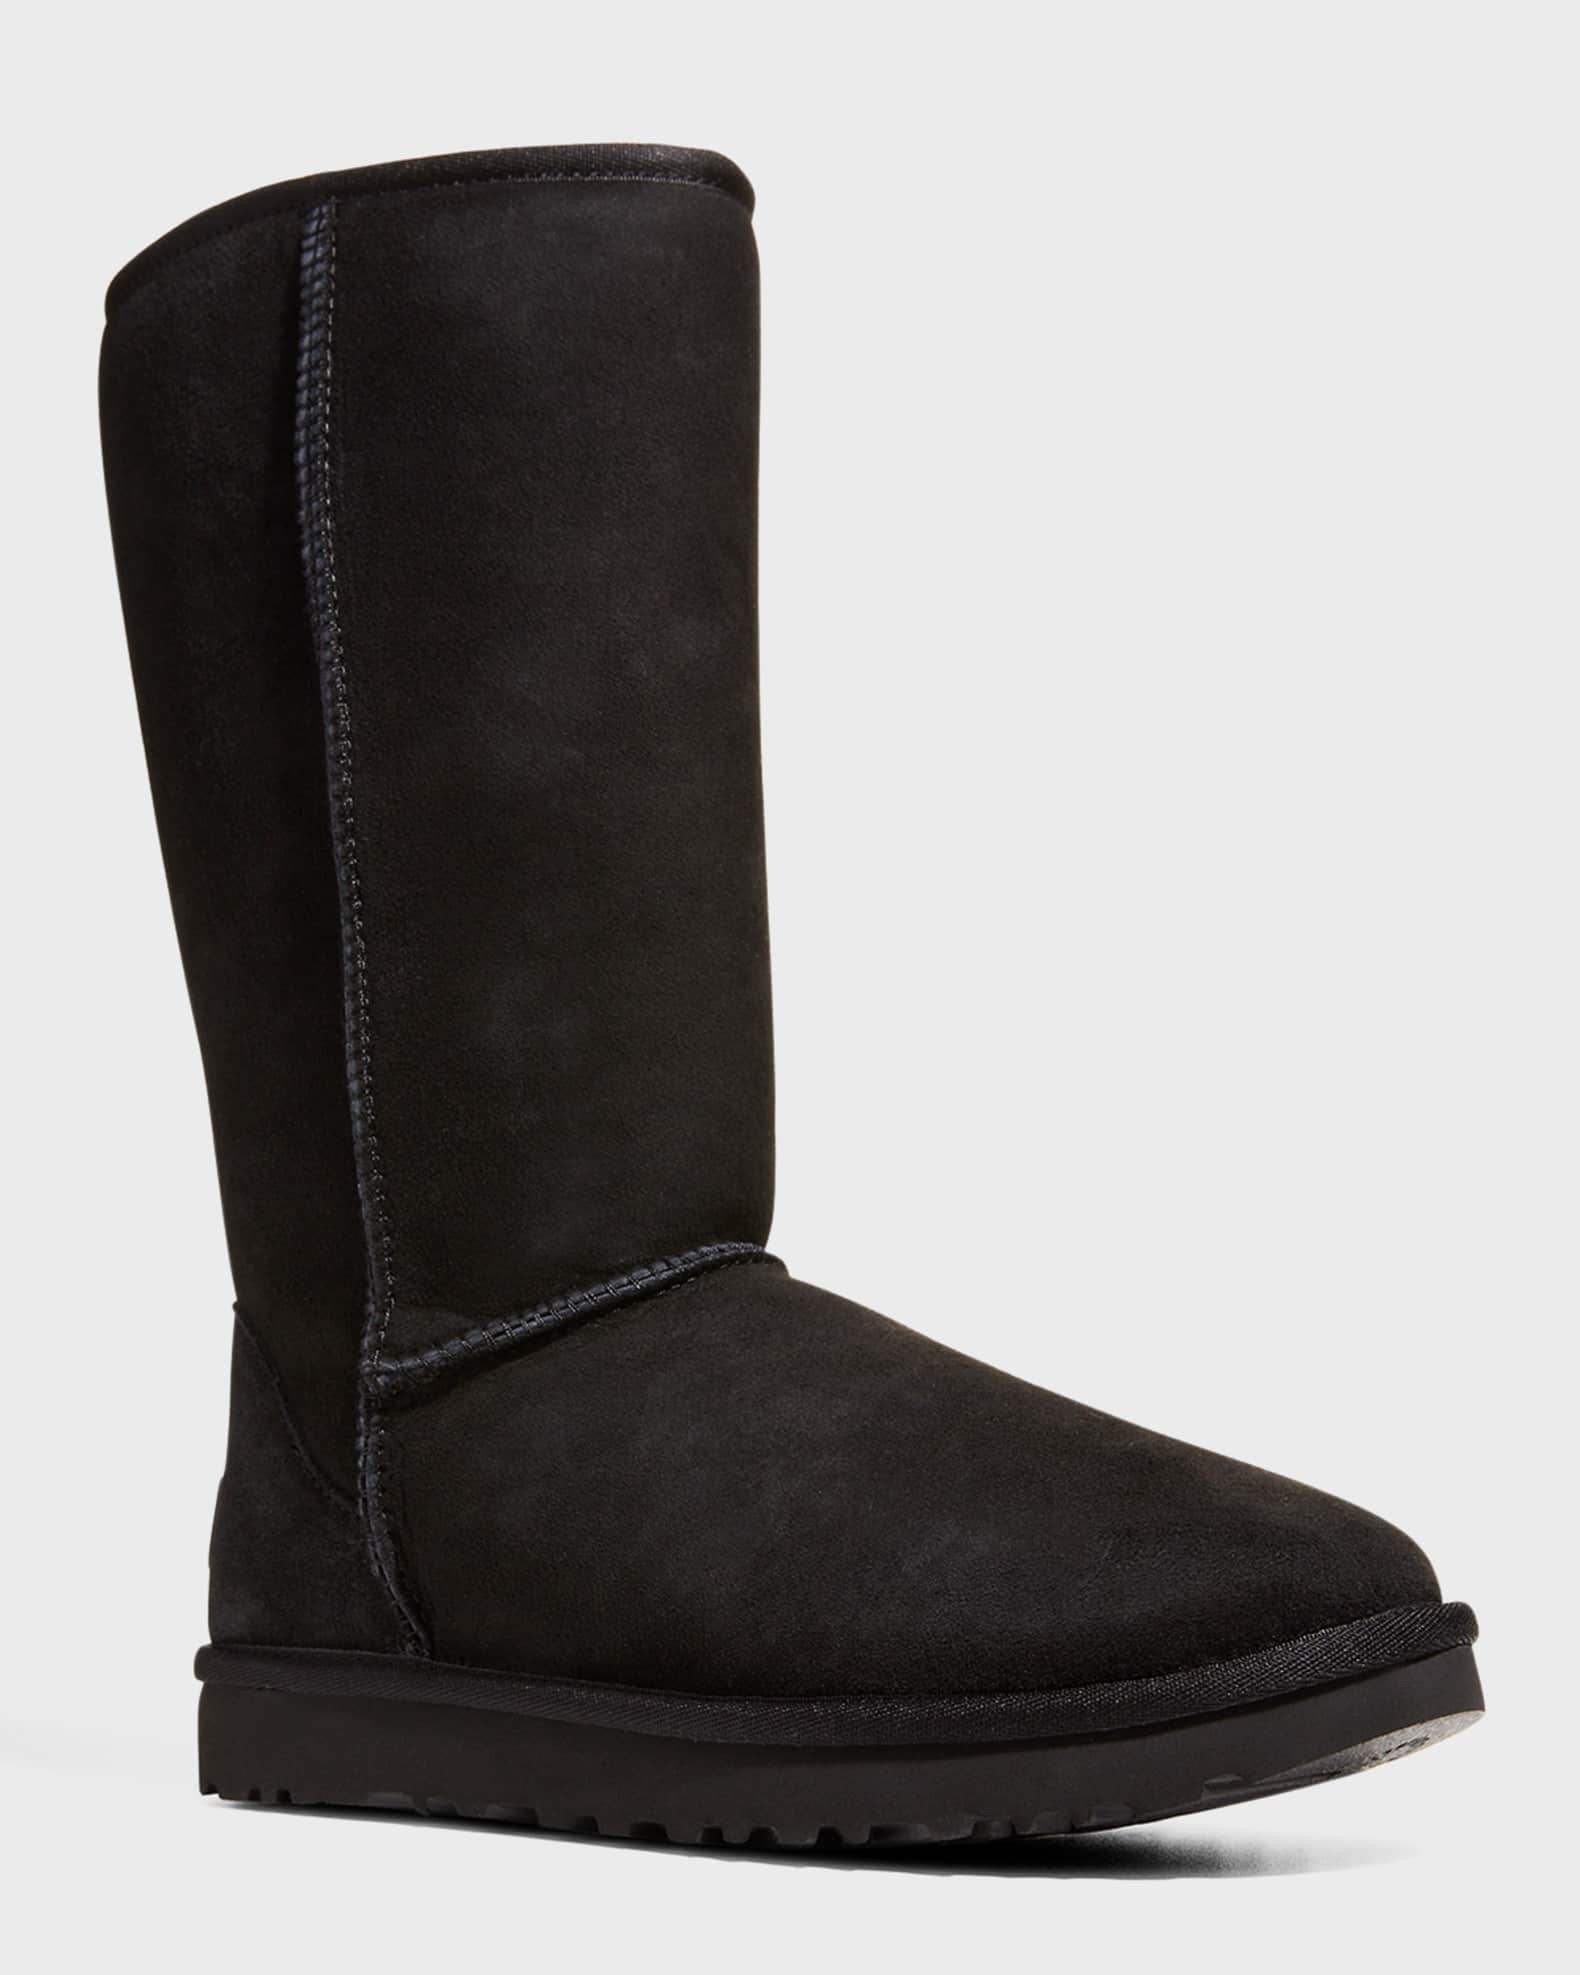 Louis Vuitton UGG Boots Available in - London Luxury Co.